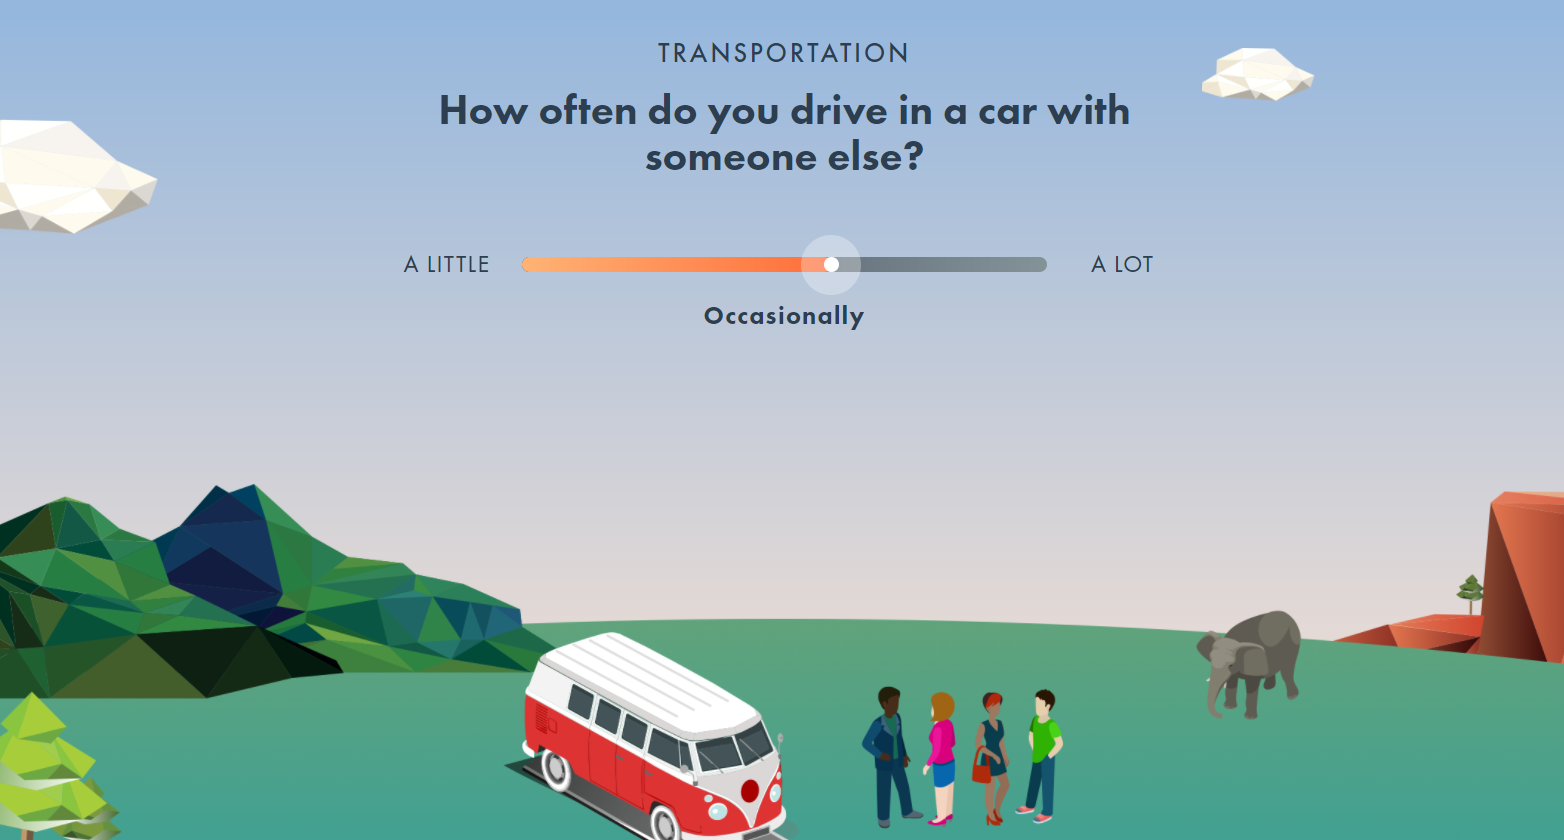 screenshot of the "earth overshoot day" website that asks "how often do you drive in a car with someone else?"